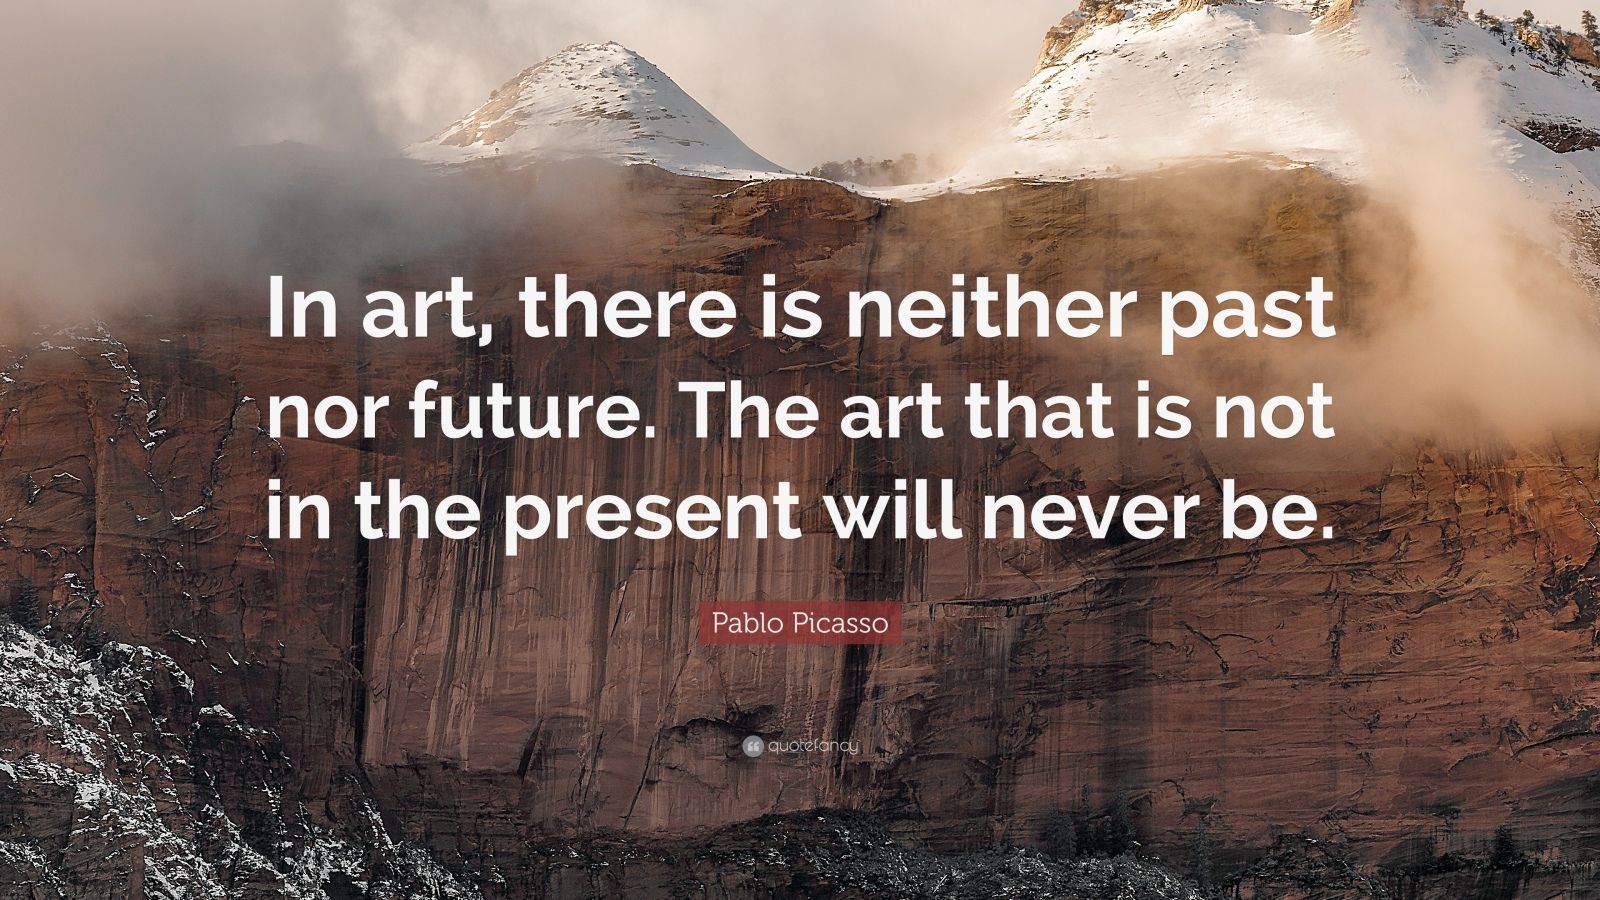 Pablo Picasso Quote: “In art, there is neither past nor future. The art ...